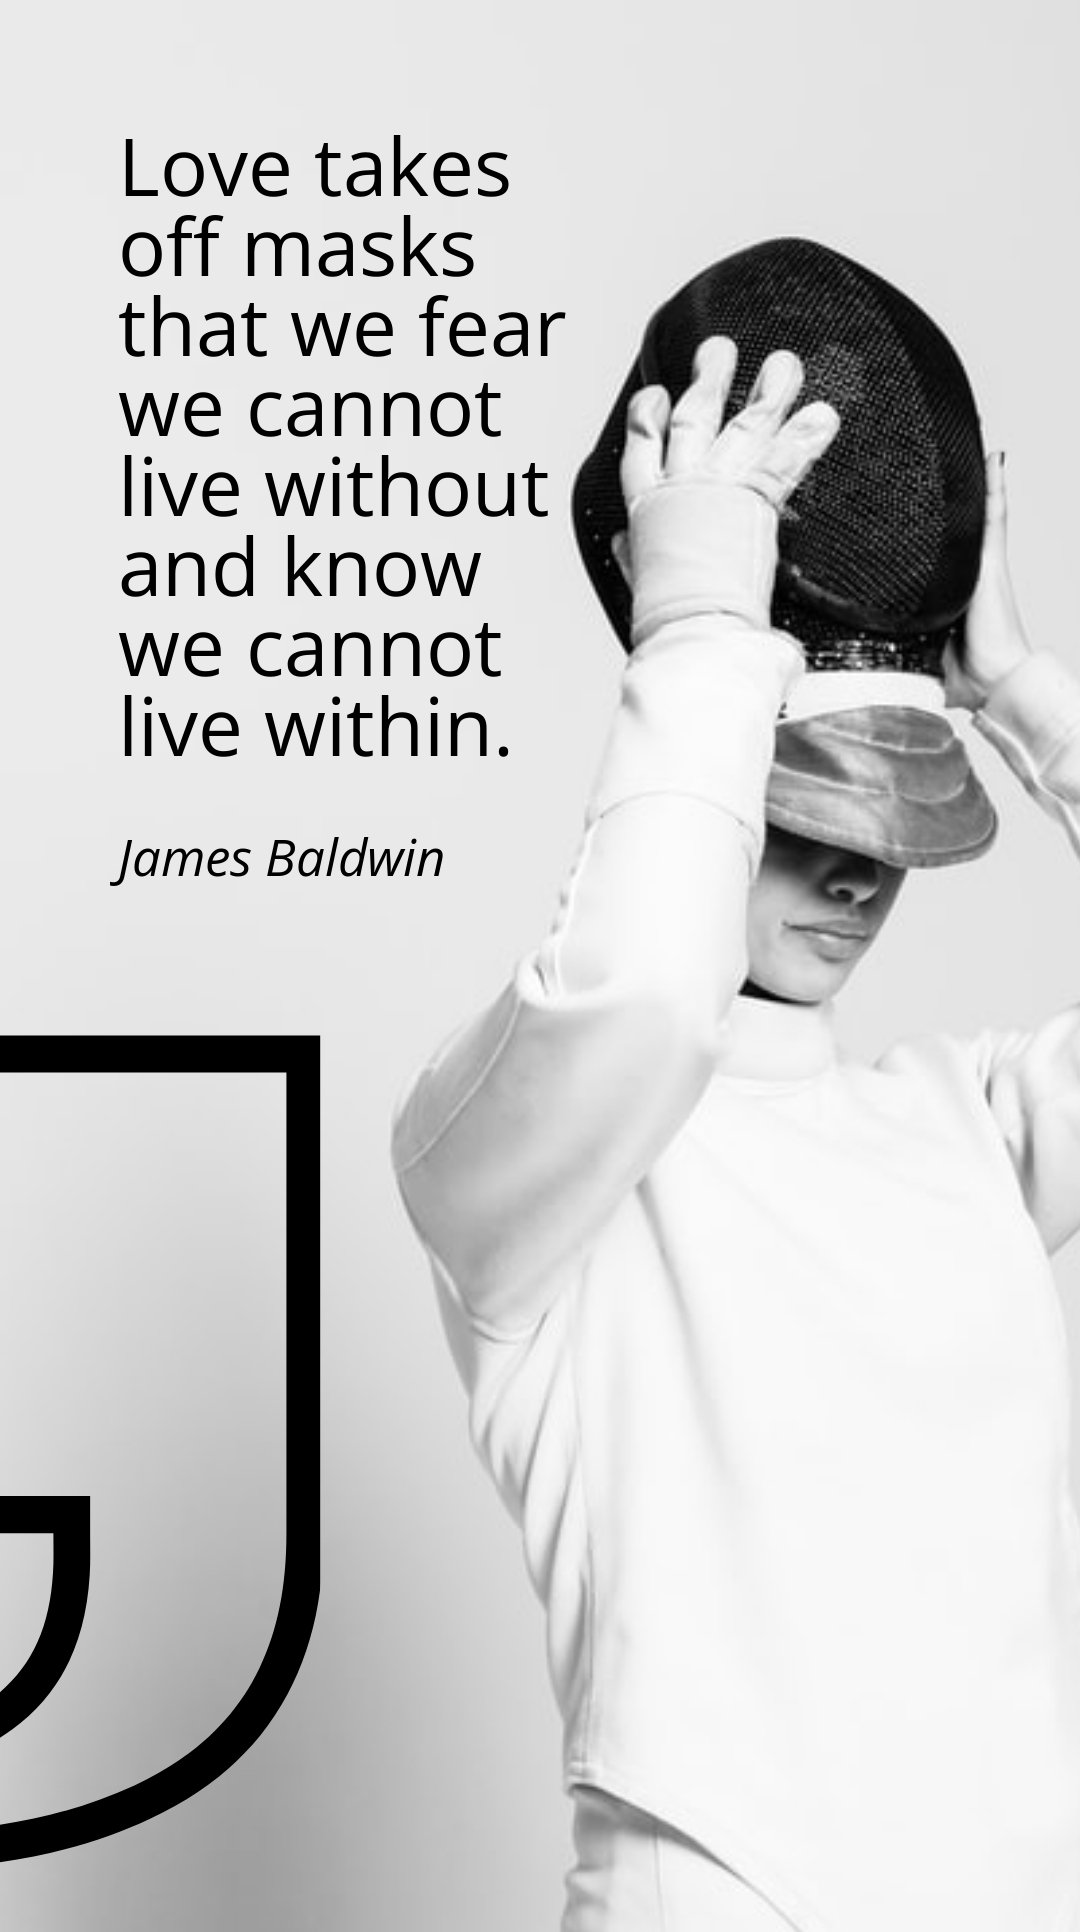 James Baldwin - Love takes off masks that we fear we cannot live without and know we cannot live within.